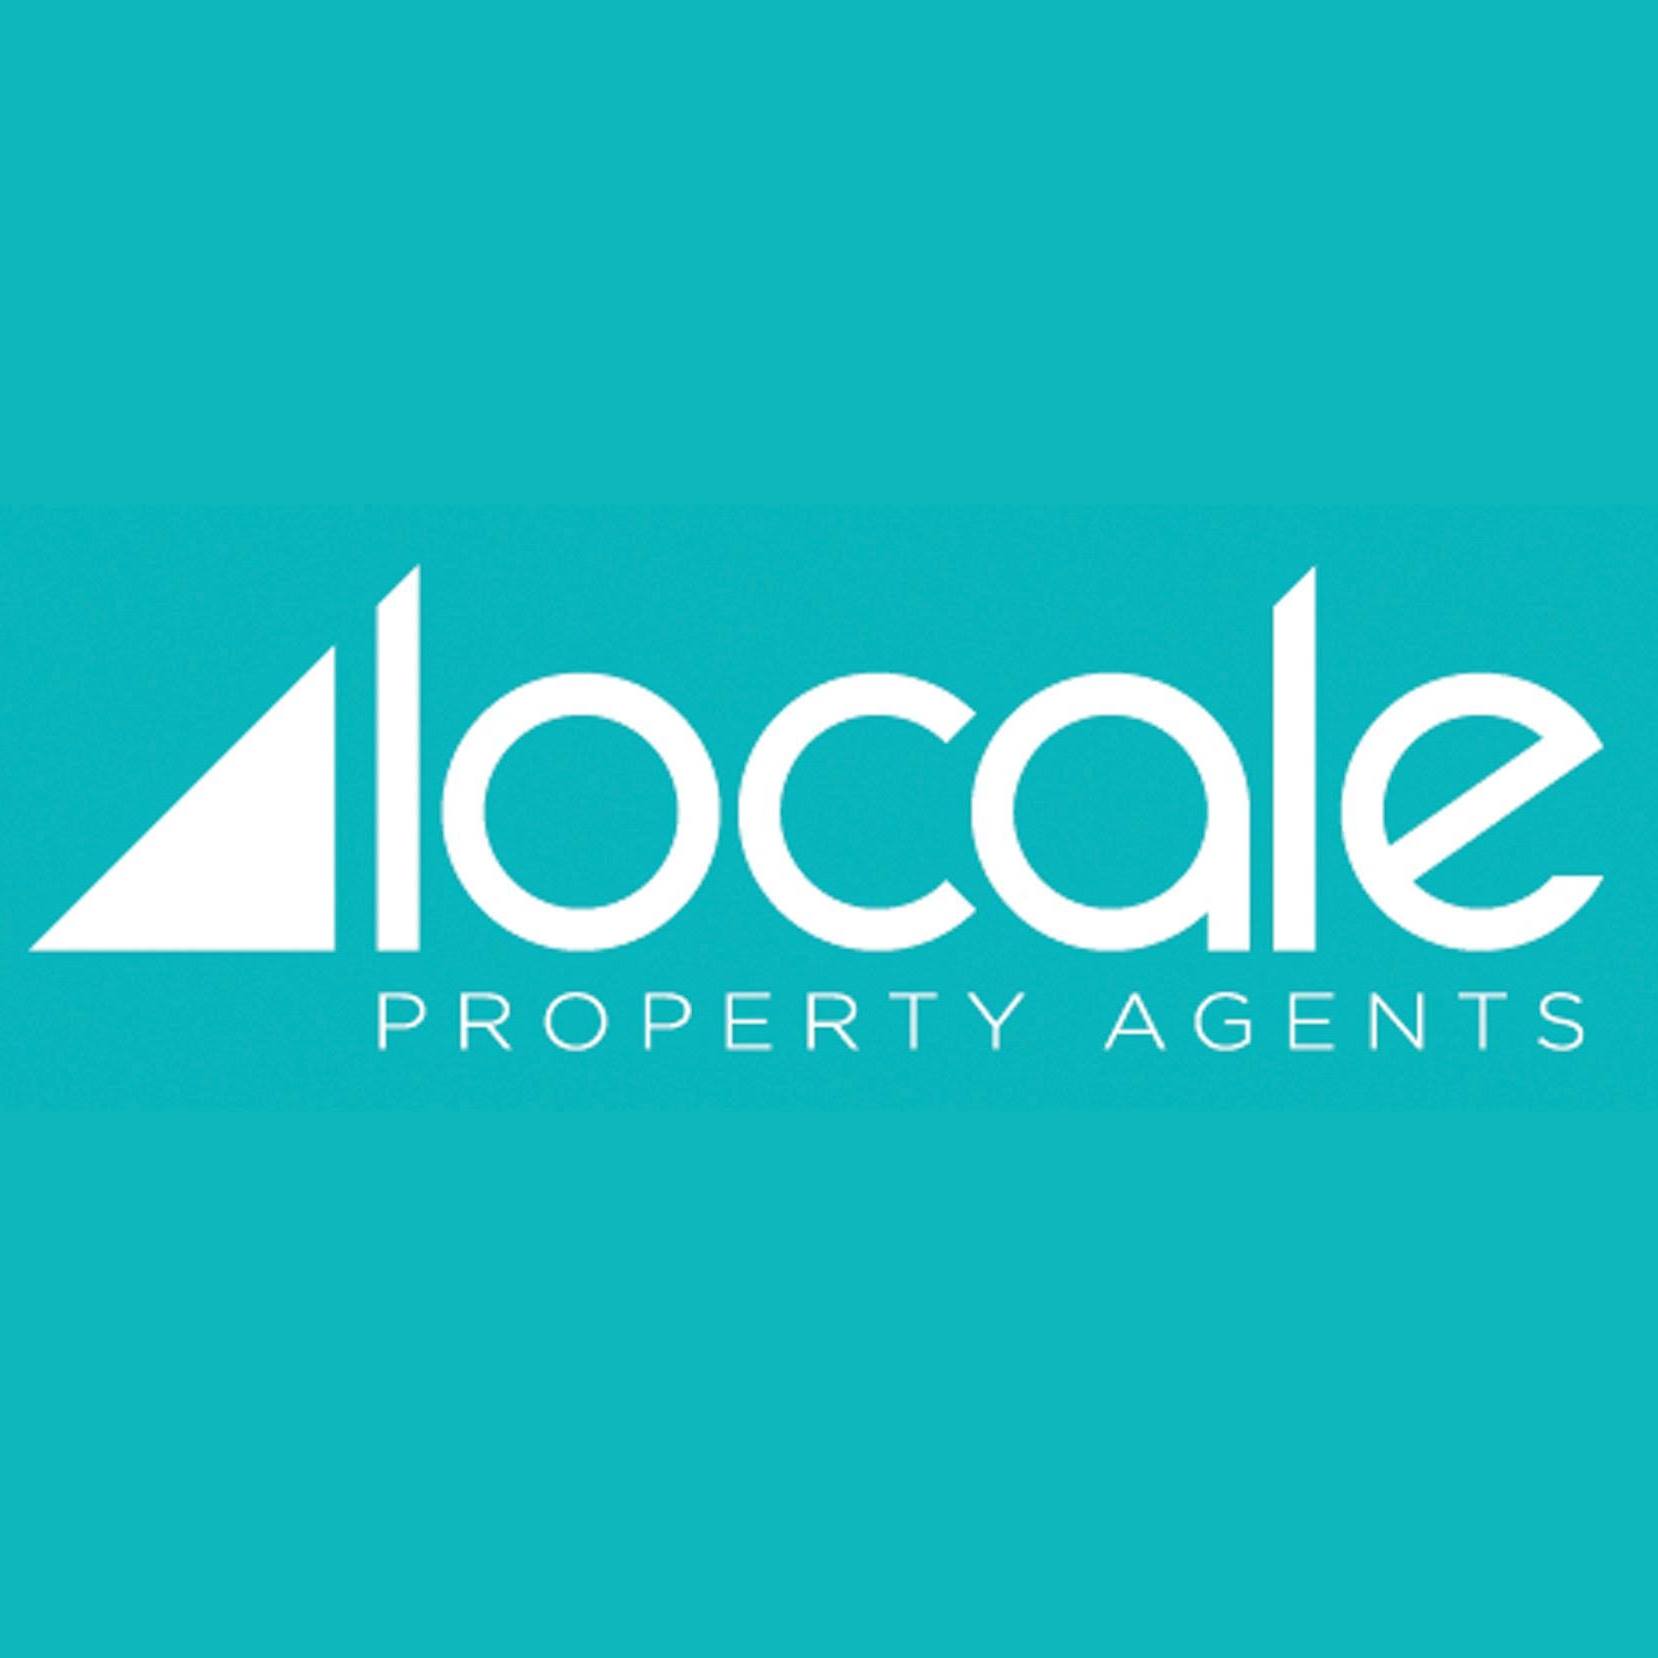 Locale Property Agents